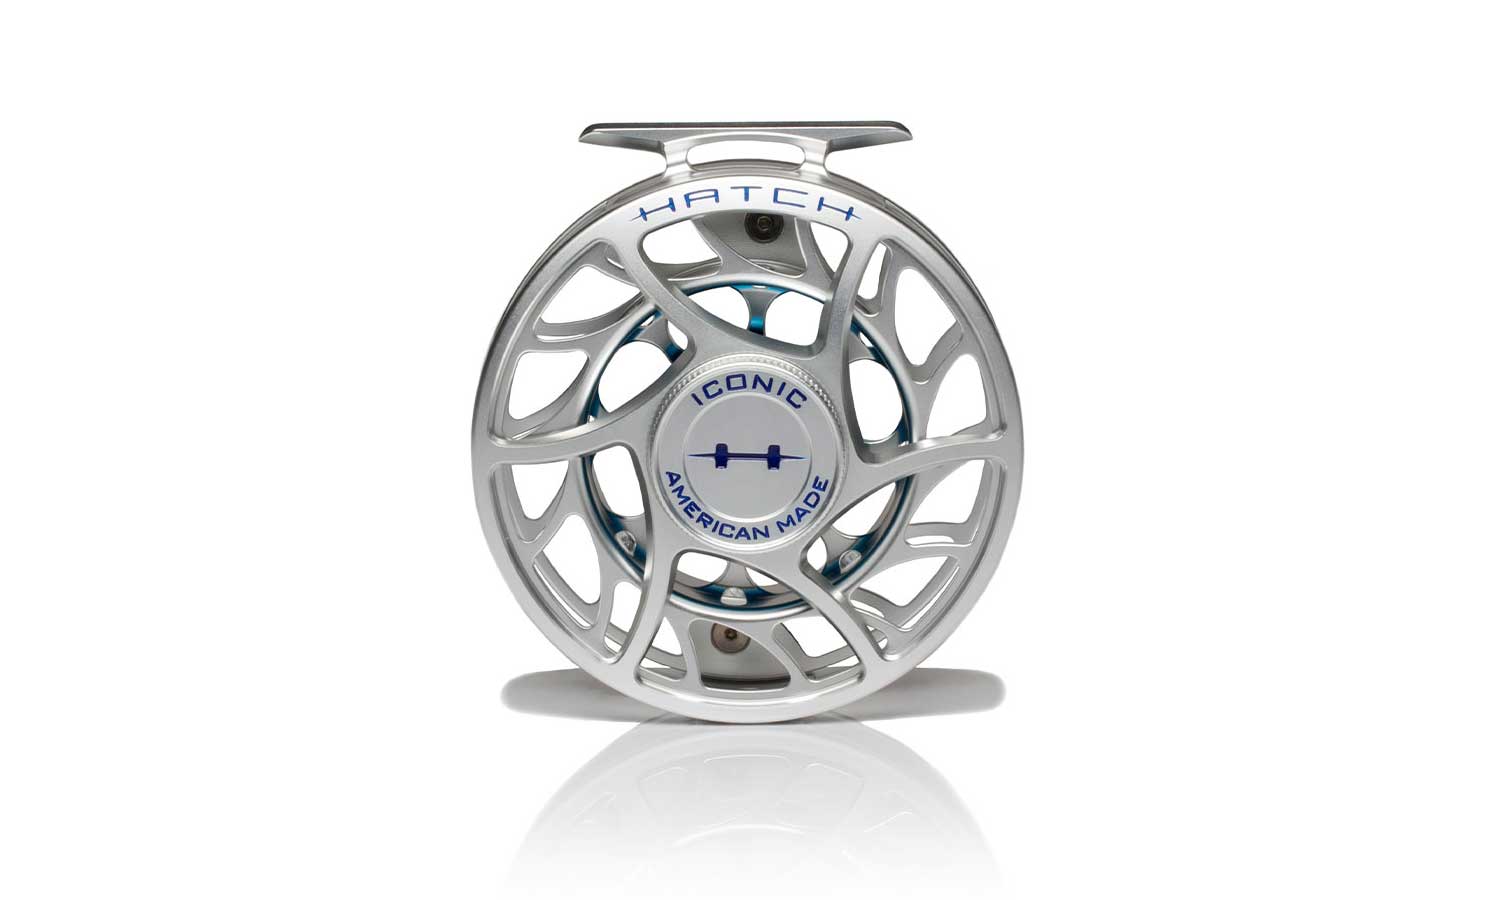 Hatch Iconic 7 Plus Fly Reel 7-9 RHR – Outfishers